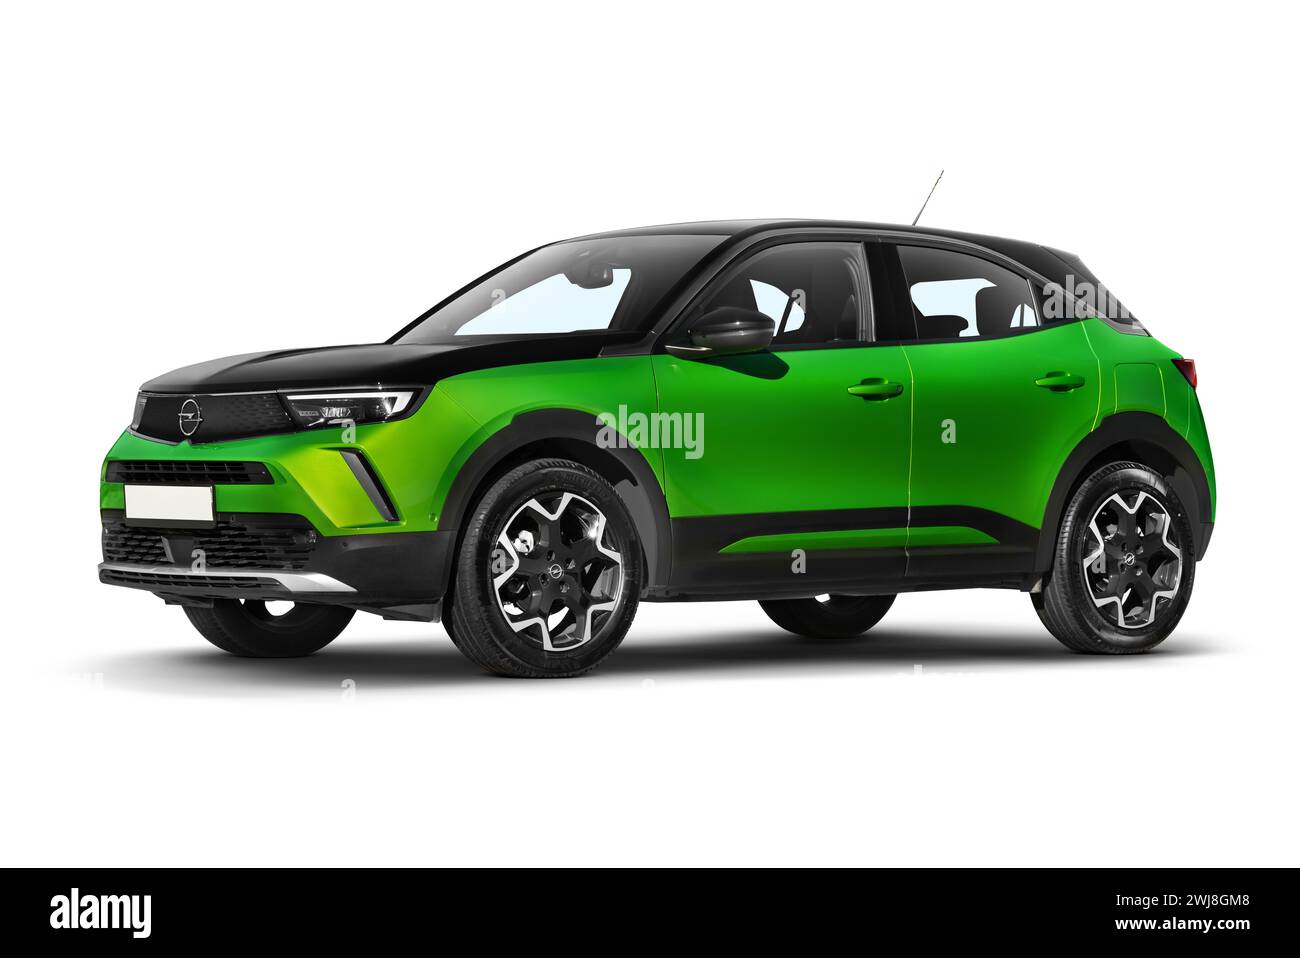 Izmir, Turkey - December 23, 2023: Studio shot of a green 2022 Opel Mokka showing its left side with a partial front view against a white background, Stock Photo